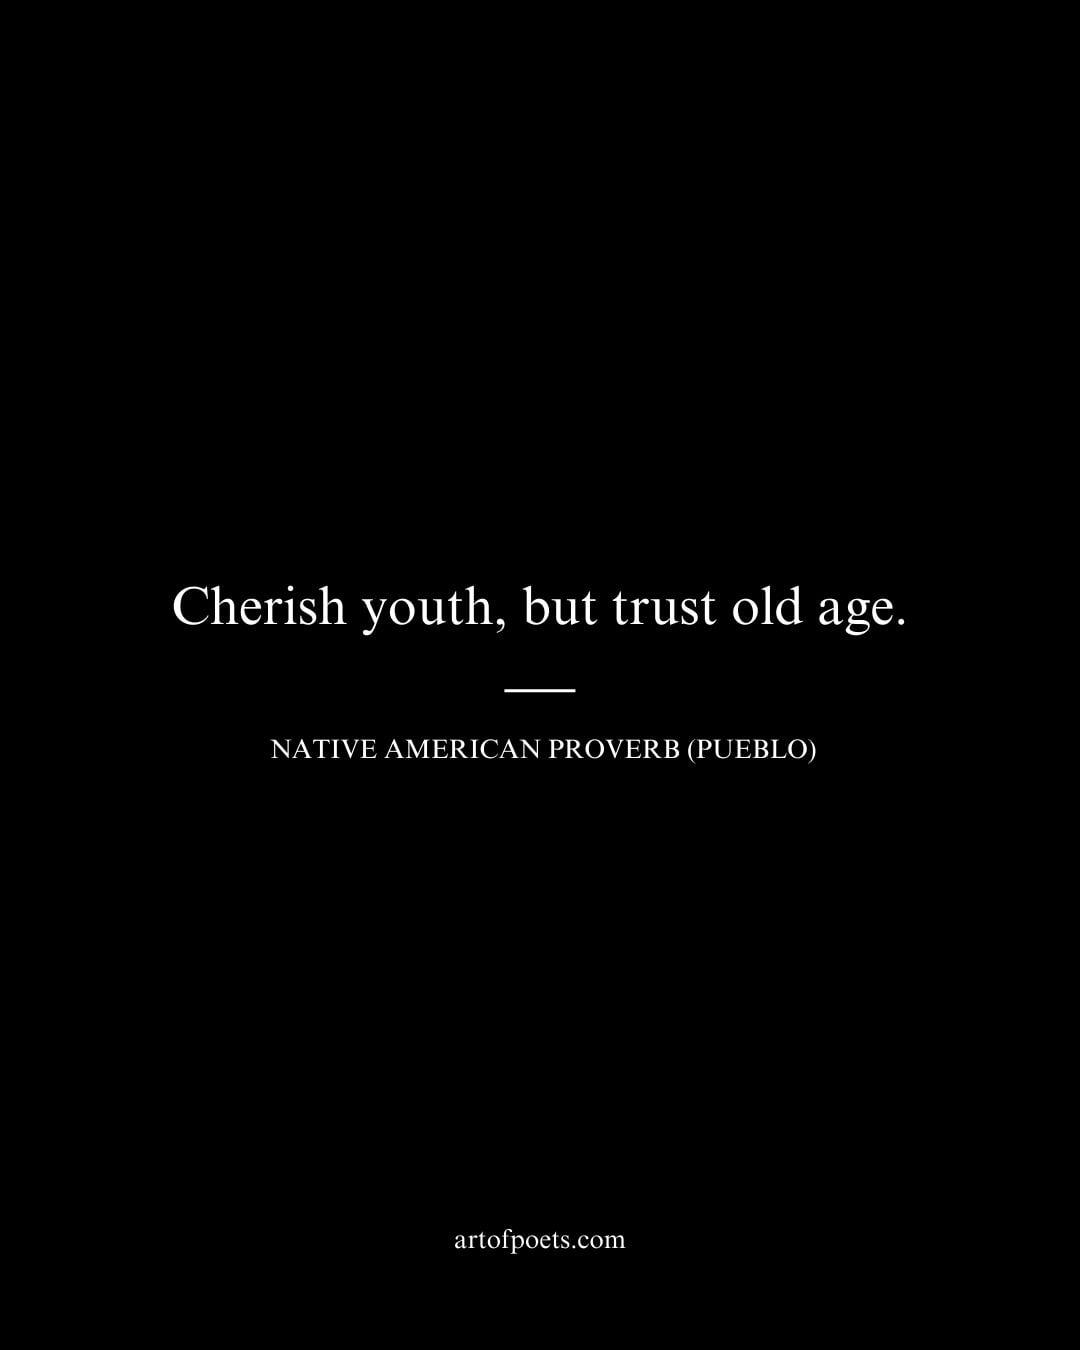 Cherish youth but trust old age